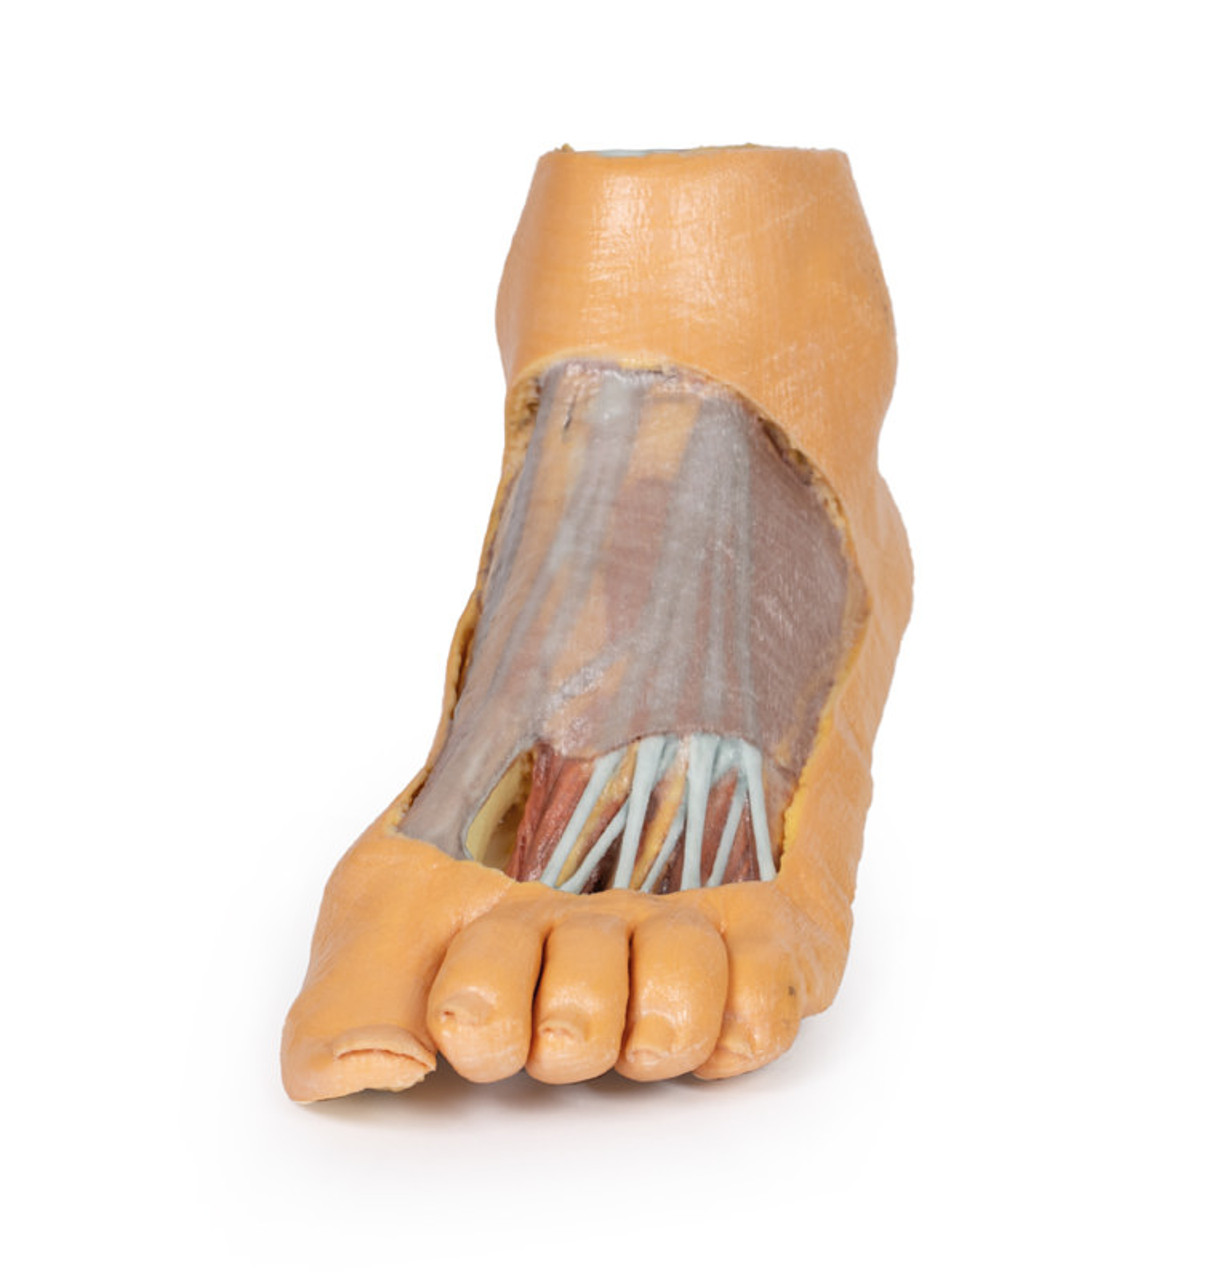 Anatomy of the plantar aspect of the foot demonstrating the bands of